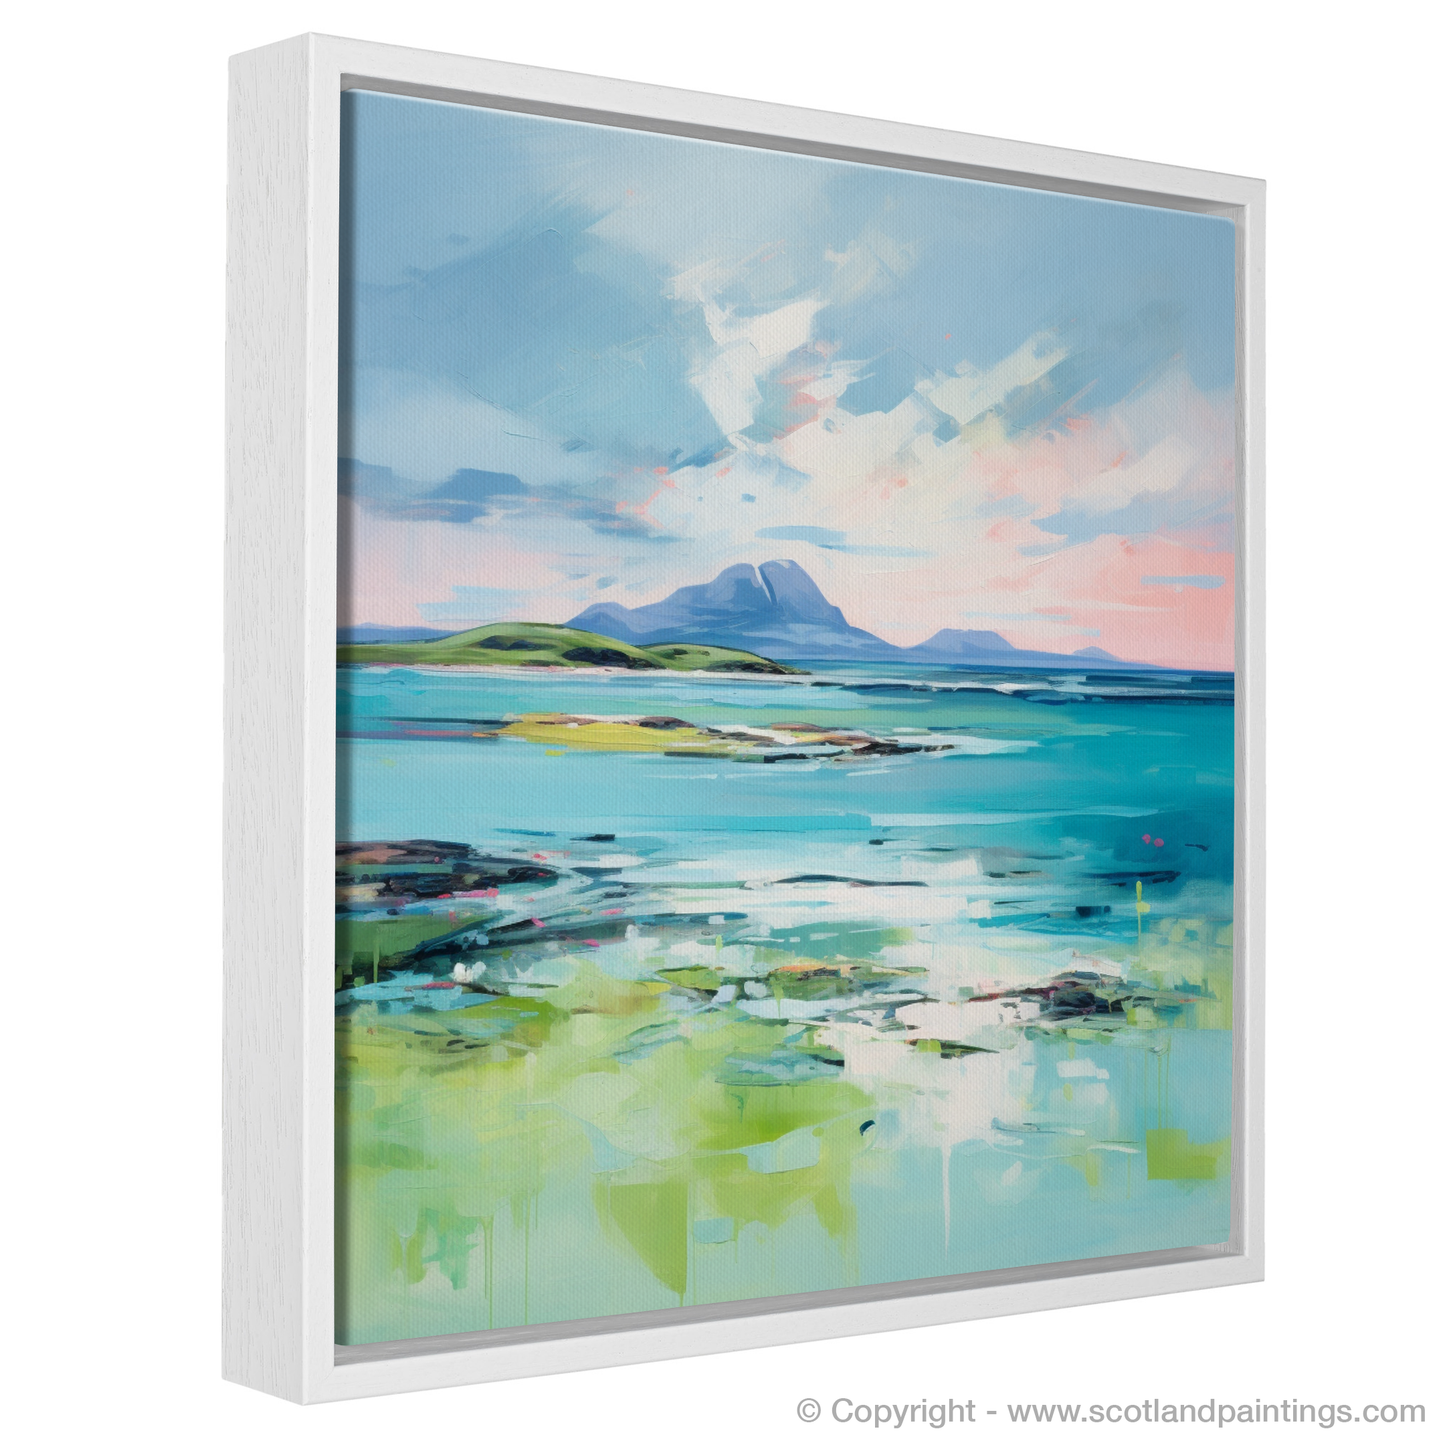 Painting and Art Print of Isle of Jura, Inner Hebrides in summer entitled "Isle of Jura Summer Symphony".